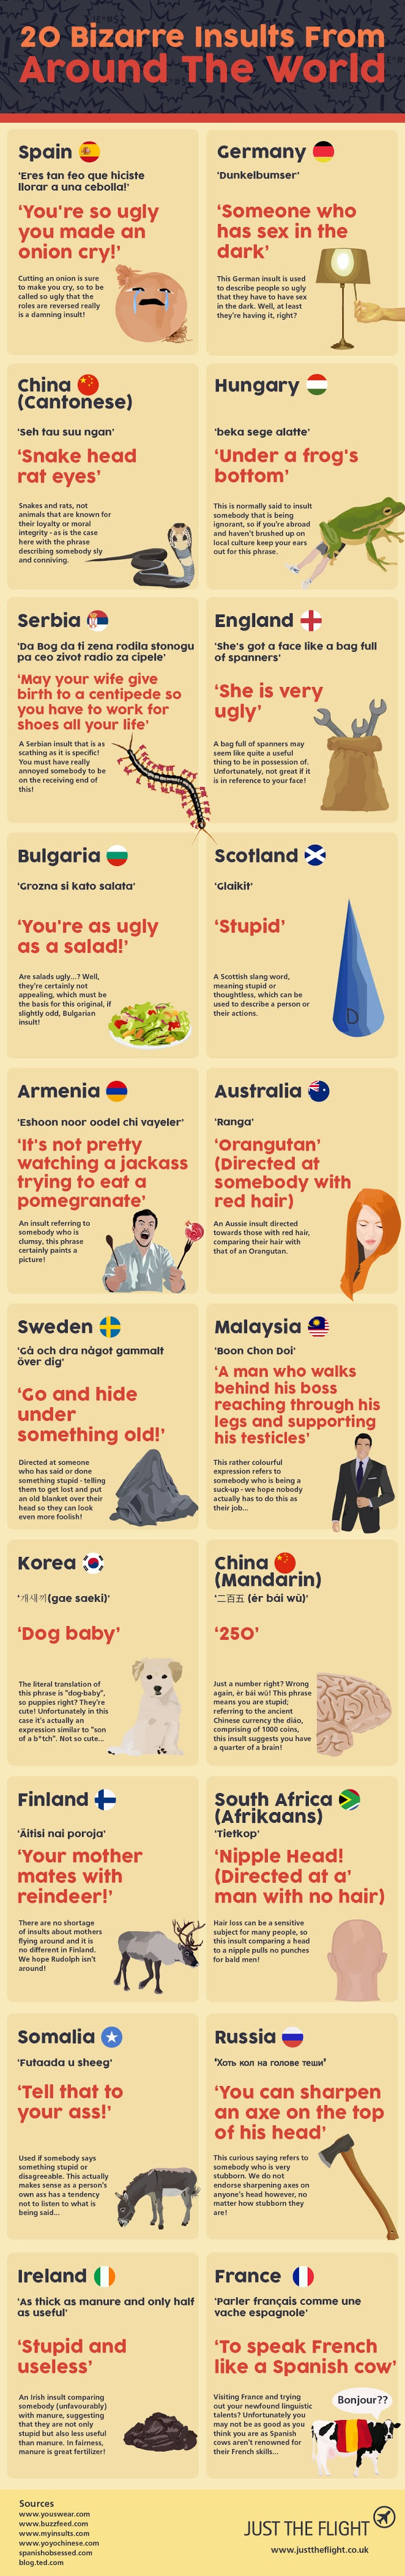 20 Bizarre Insults from Around the World